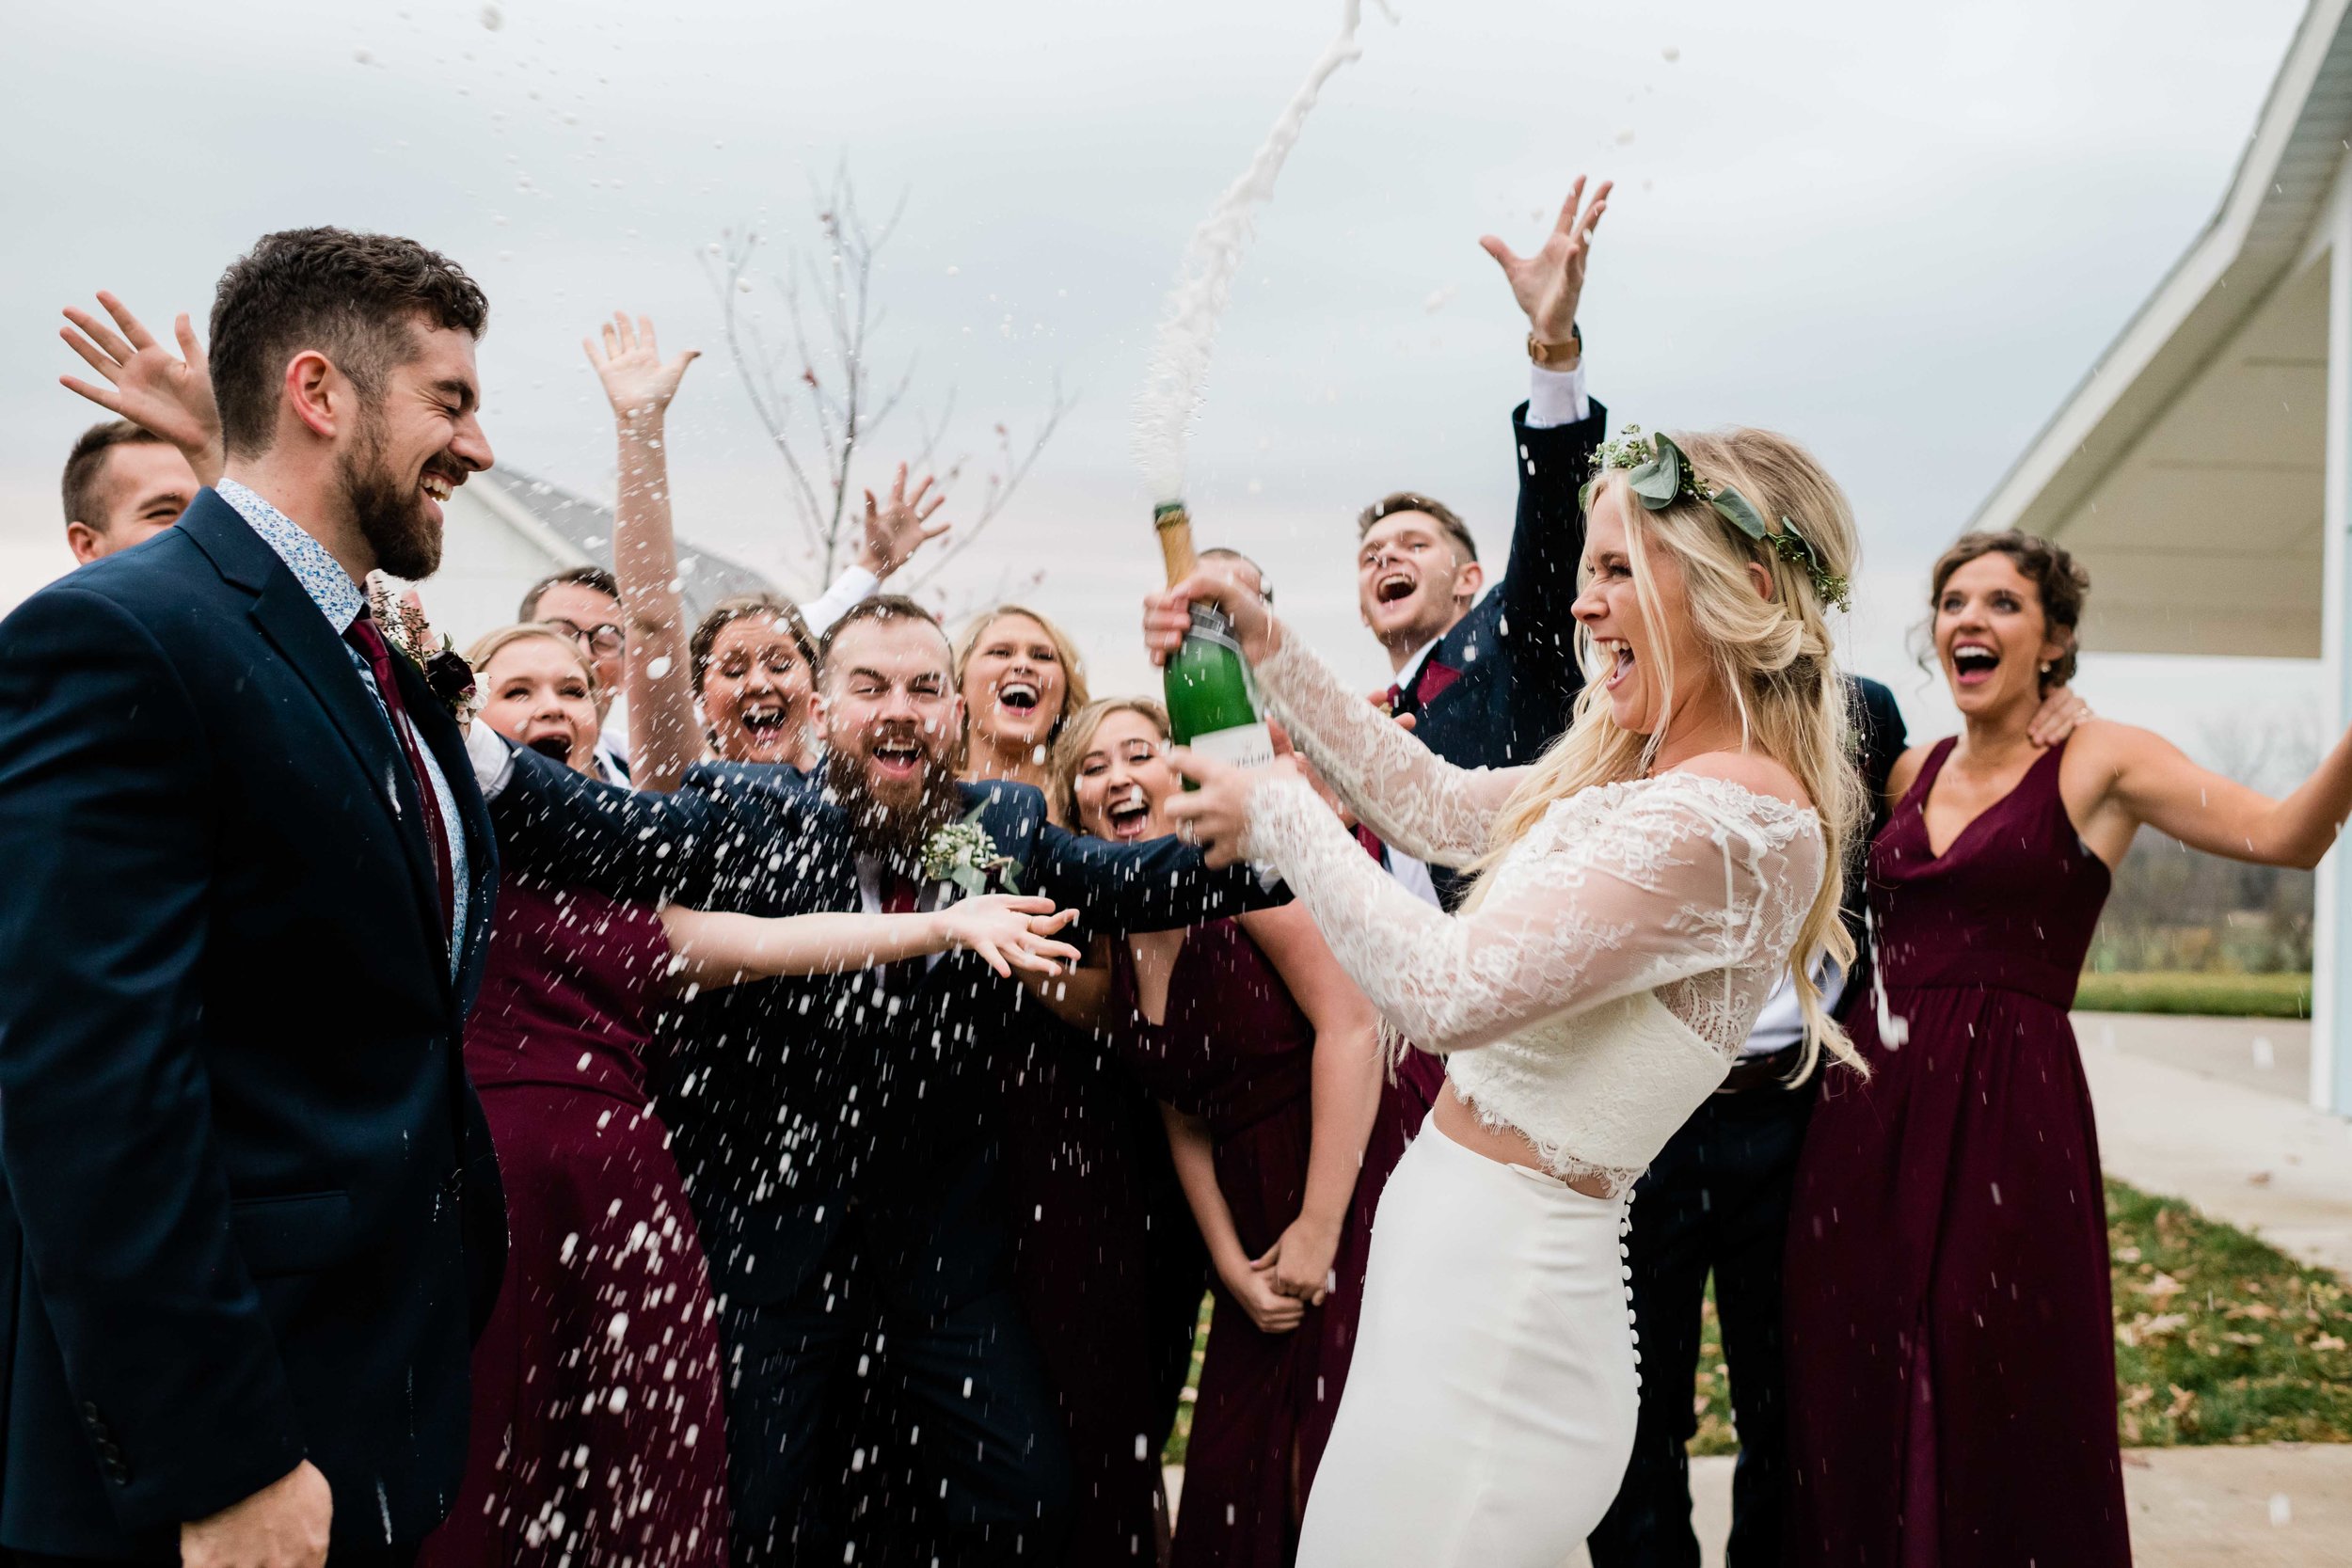 Bride opens champagne and it sprays all over wedding party